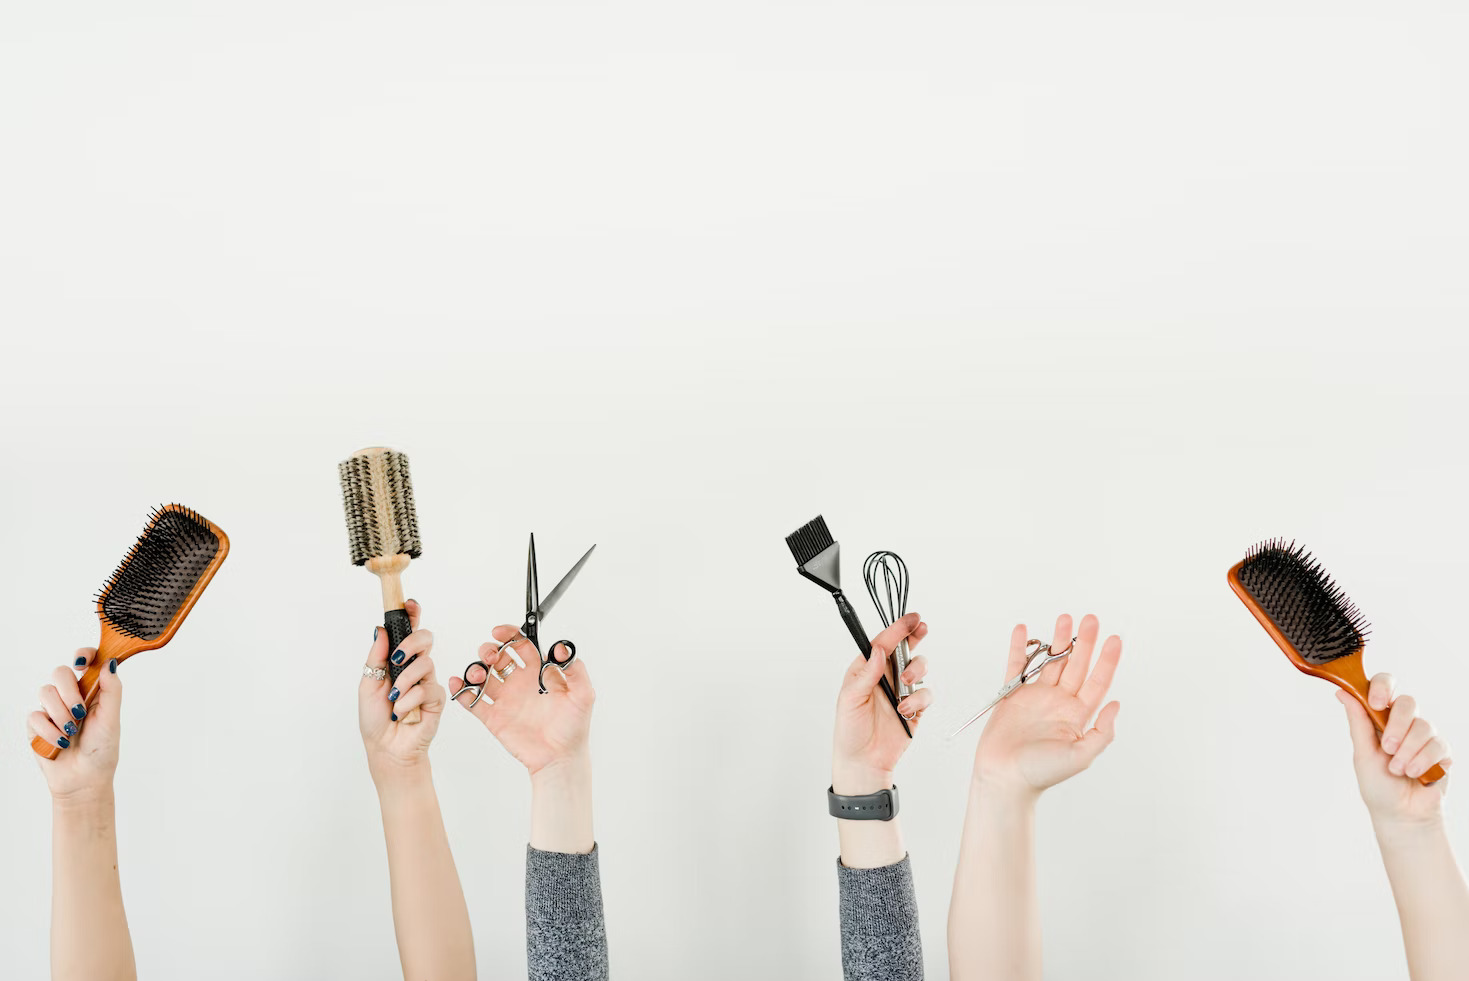 Hairstyling for Makeup Artists Why Is It Crucial thumbnail hairstyling for makeup artists - Hairstyling for Makeup Artists Why Is It Crucial thumbnail - Hairstyling for Makeup Artists- Why Is It Crucial?